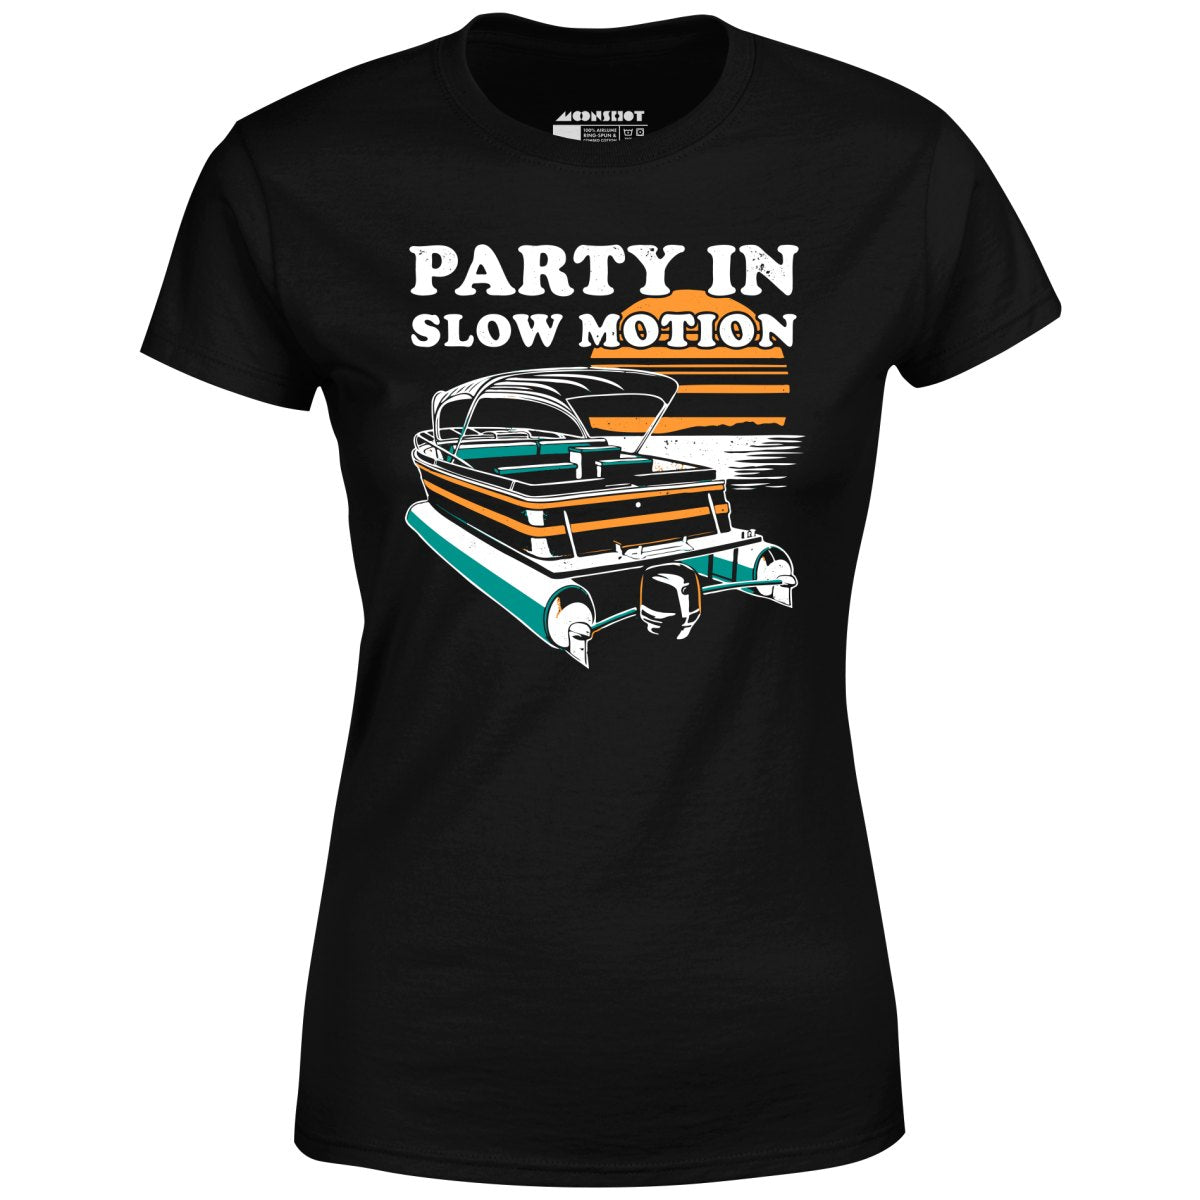 Party in Slow Motion - Women's T-Shirt